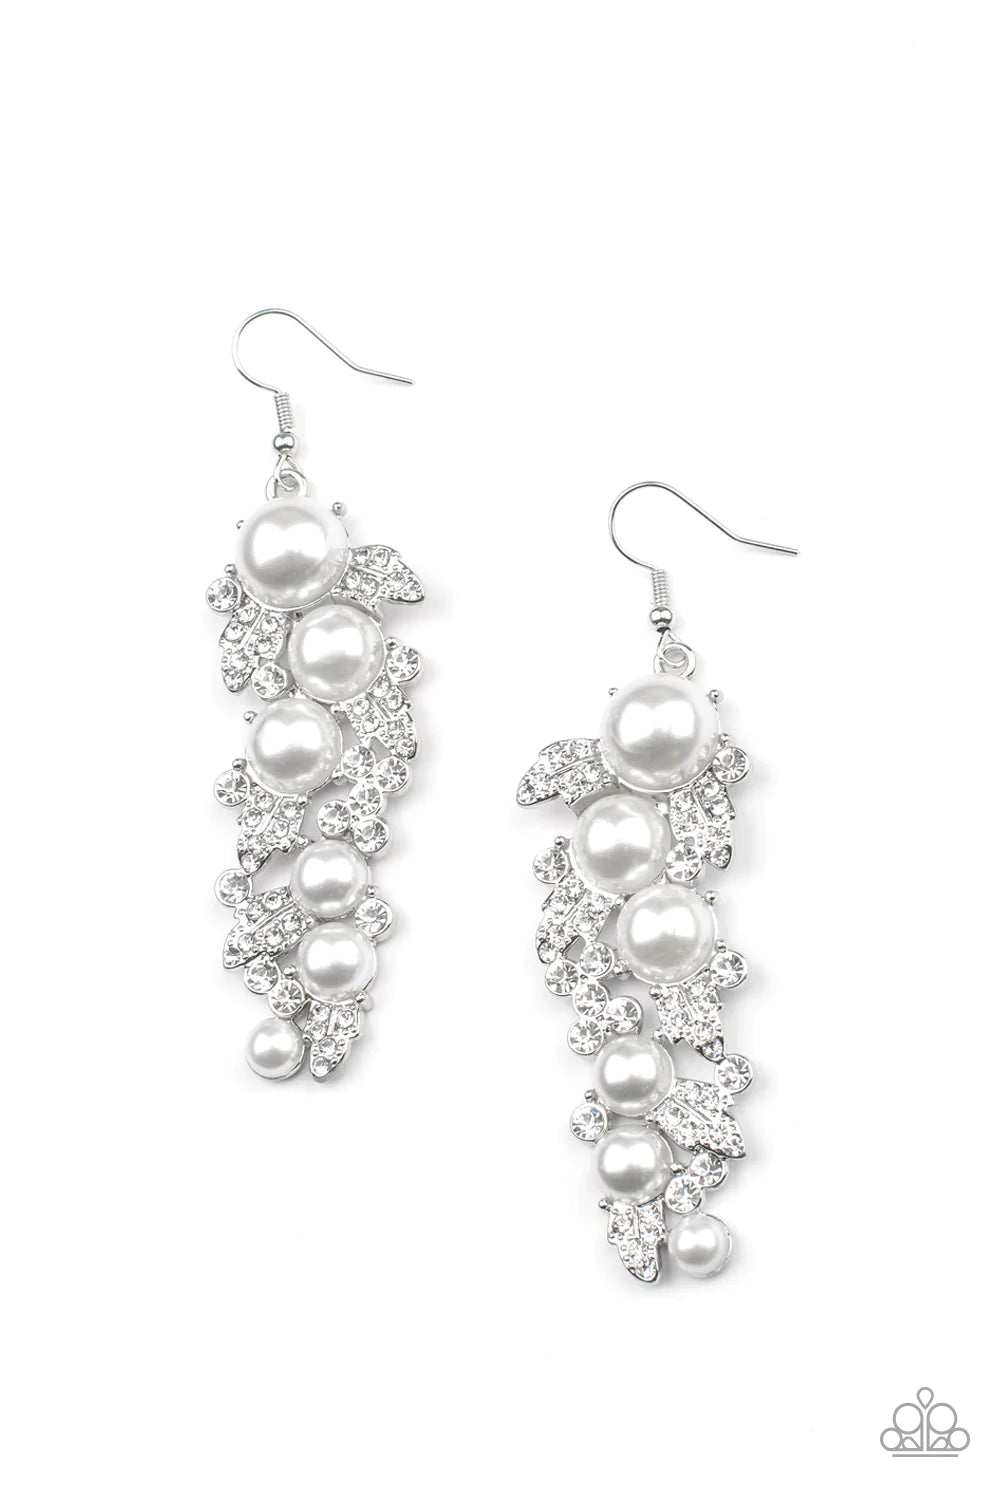 The Party Has Arrived ♥ White Pearl Earrings ♥ Paparazzi Accessories - GlaMarous Titi Jewels